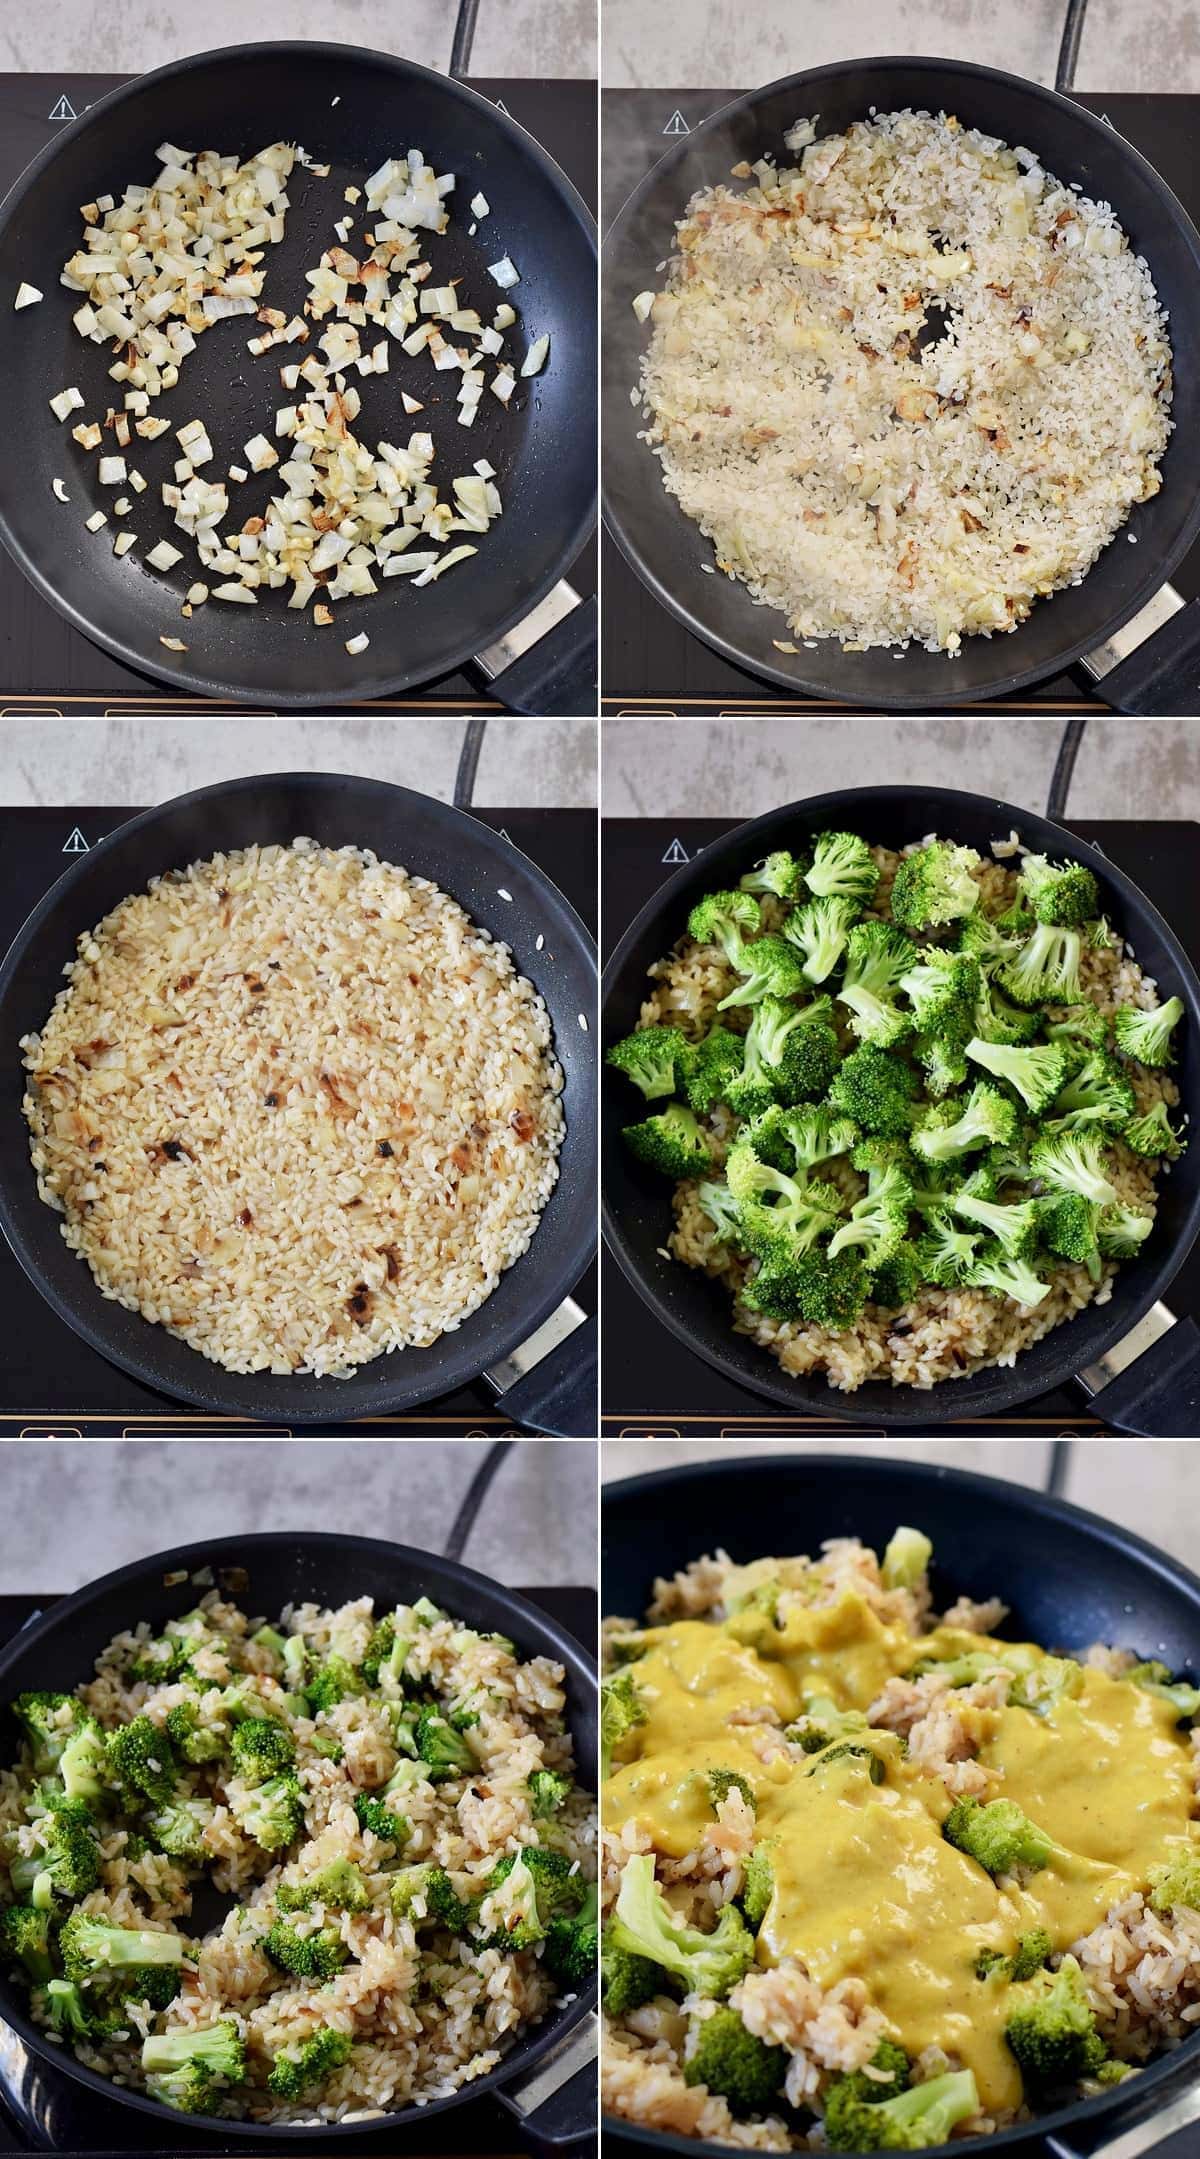 6 process shots of how to make vegan risotto with broccoli and cheese